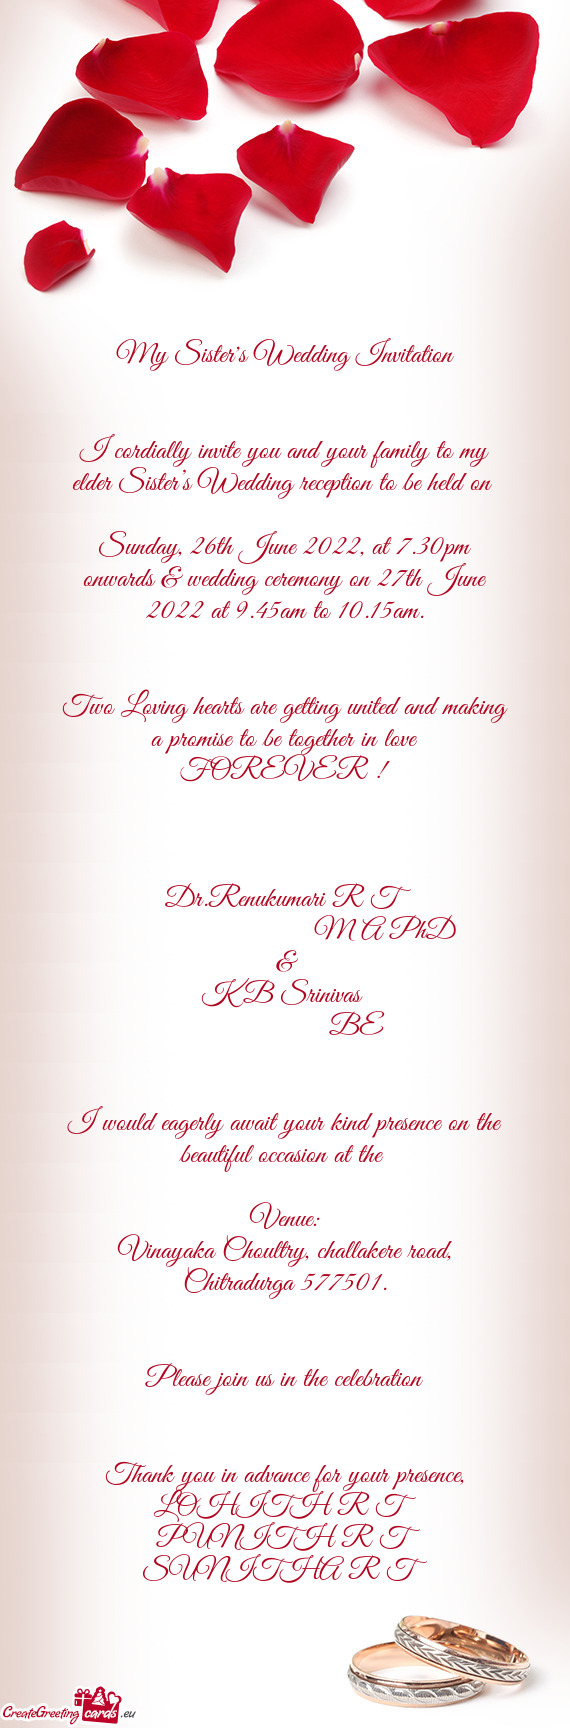 I cordially invite you and your family to my elder Sister’s Wedding reception to be held on